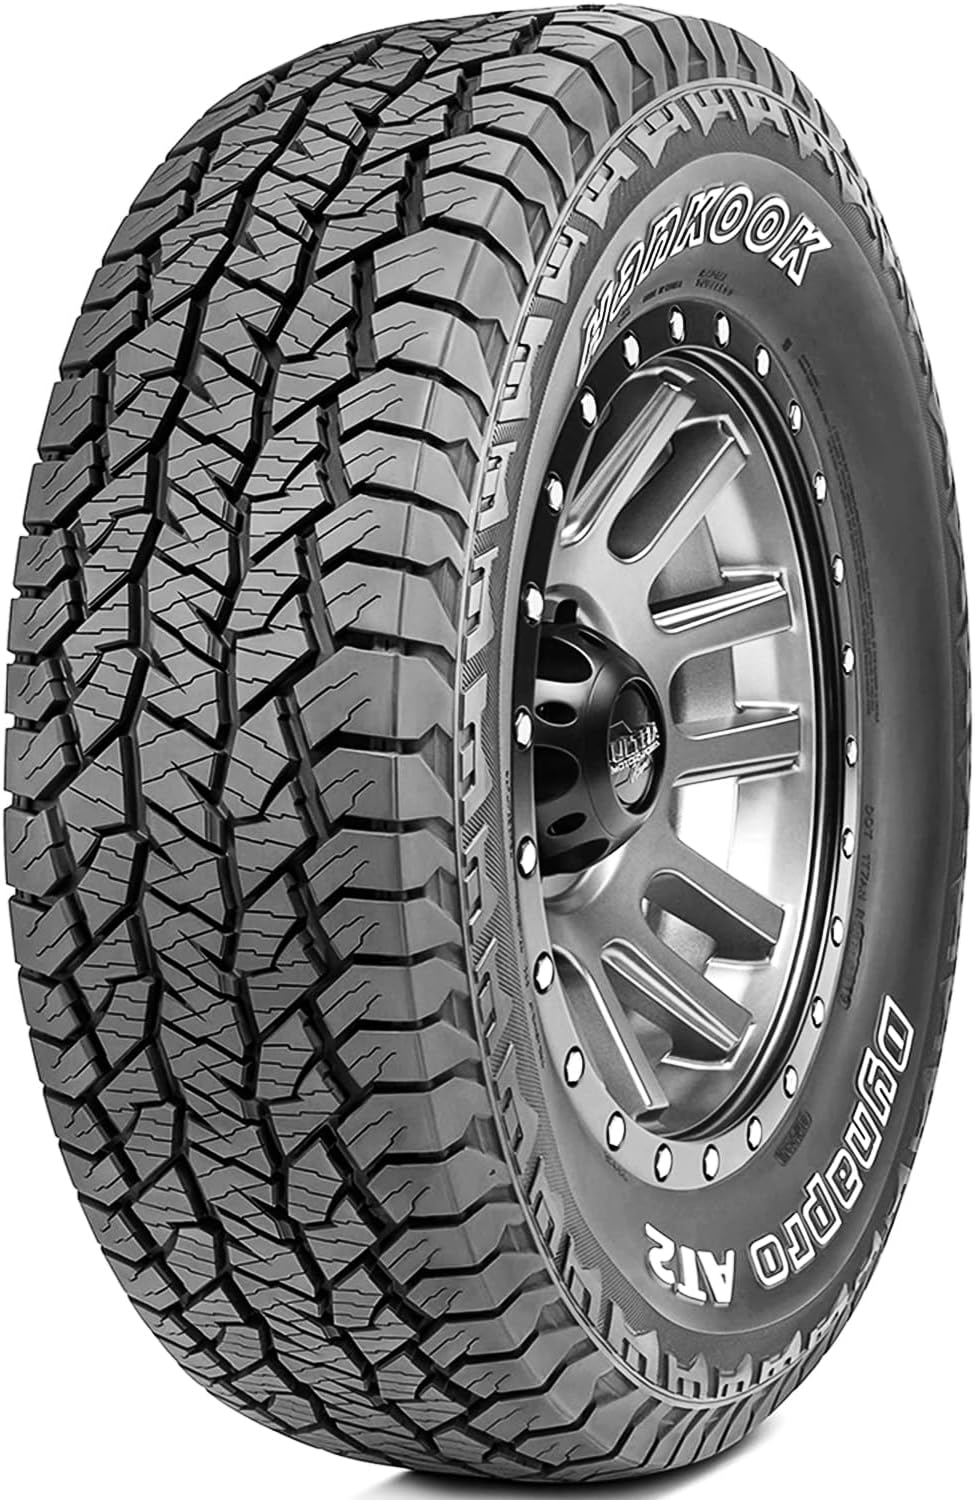 Best Off Road Tire Options for Your Adventurous Journey